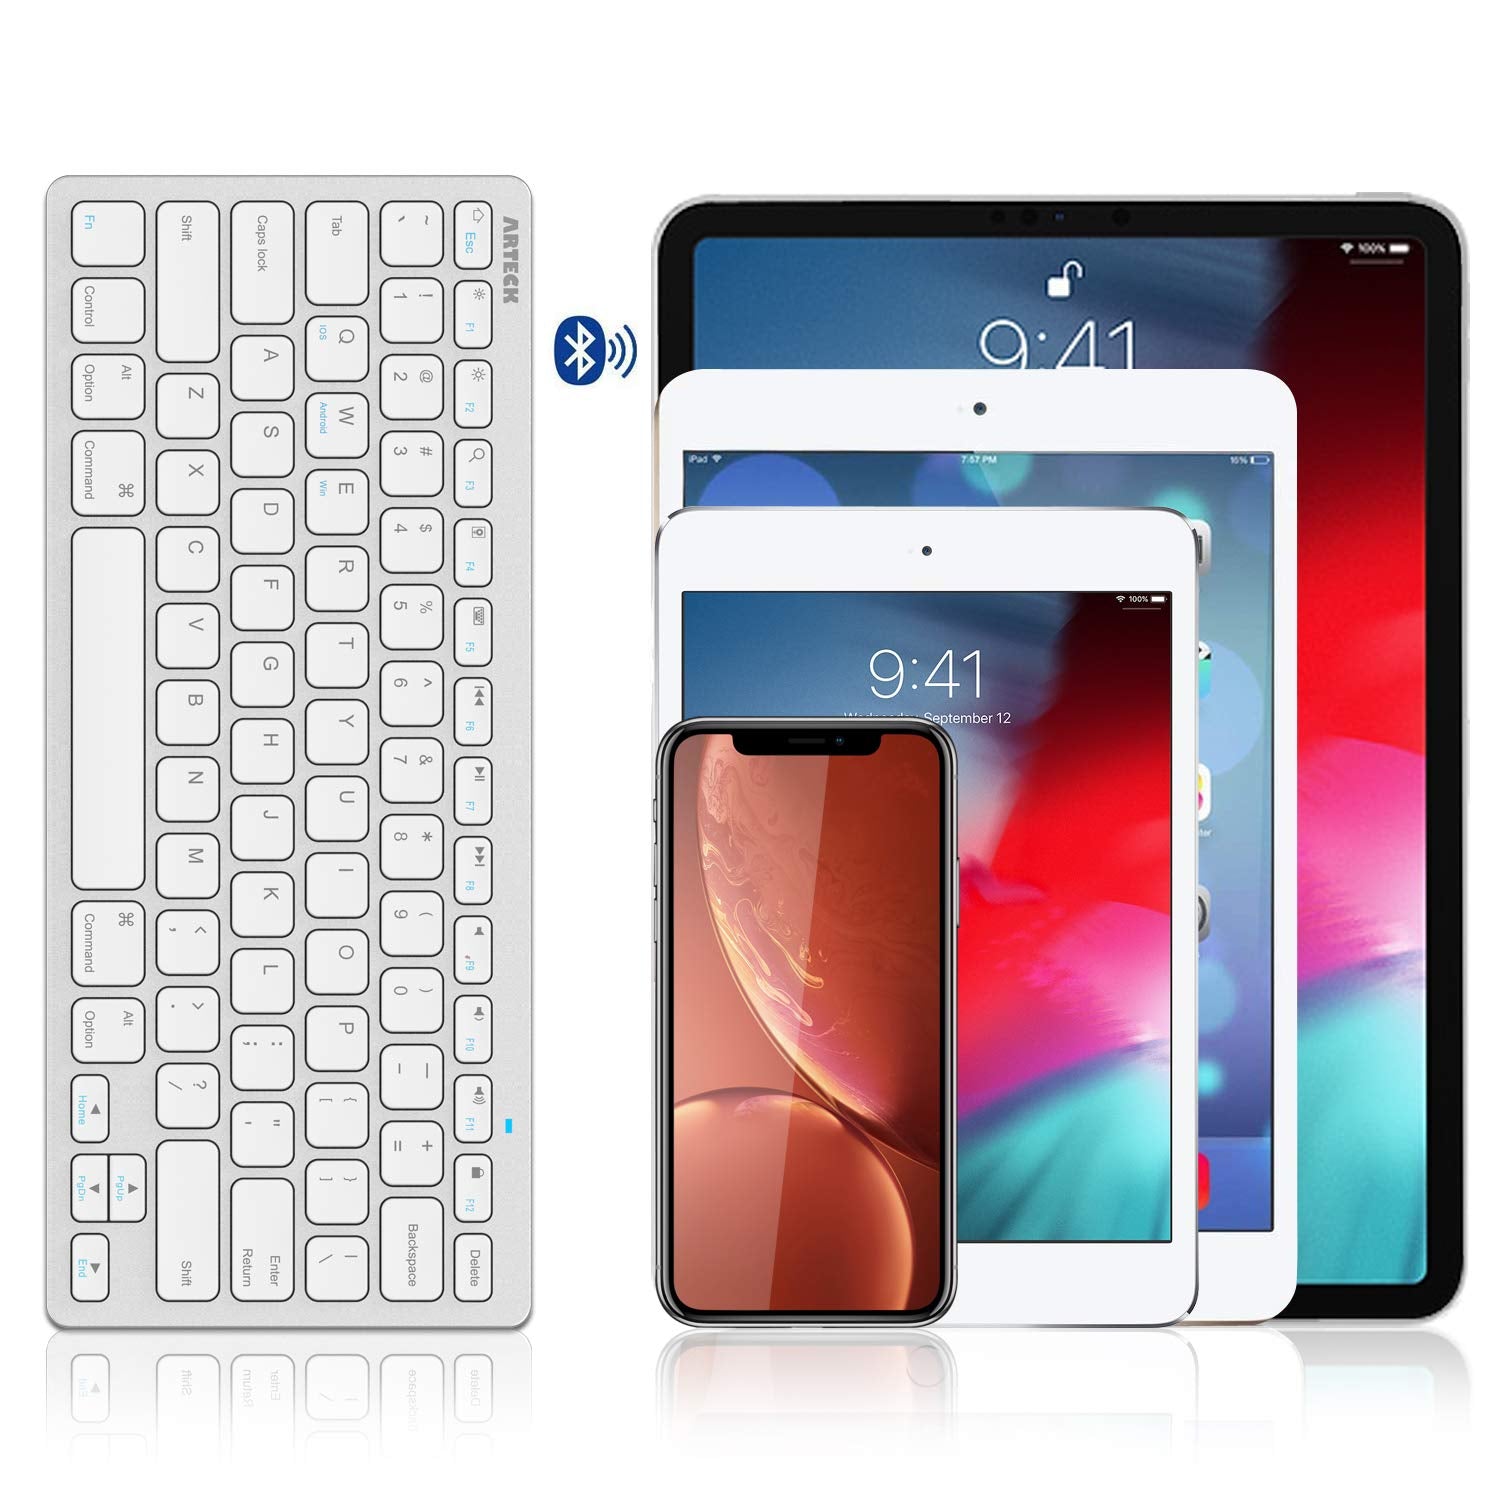 Arteck Ultra-Slim Bluetooth Keyboard Compatible with iPad 10.2-inch/iPad Air/iPad 9.7-inch/iPad Pro/iPad Mini, iPhone and Other Bluetooth Enabled Devices Including iOS, Android, Windows Silver